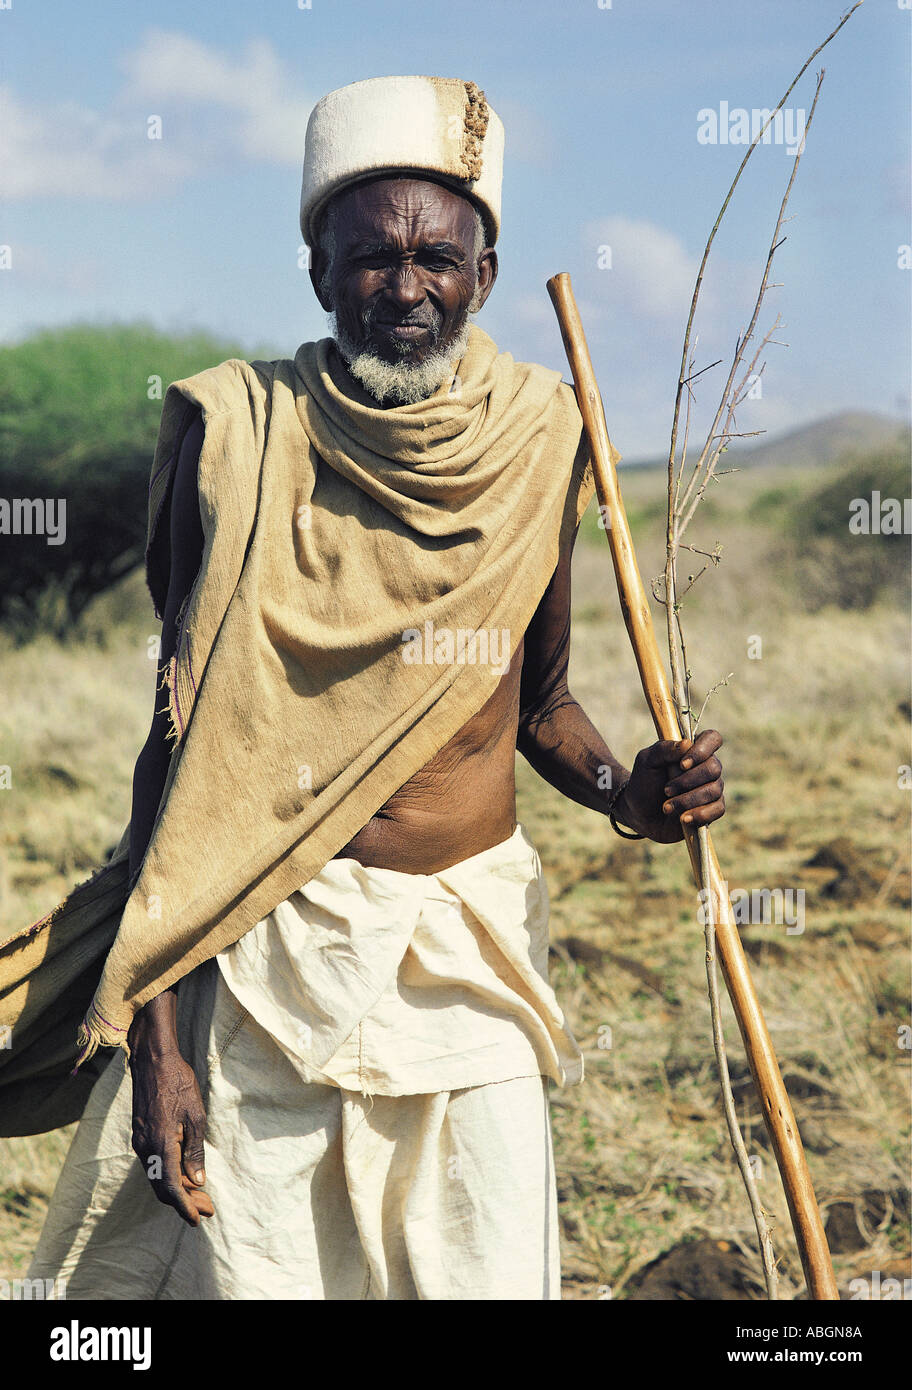 Old Gabbra man holding a wooden stick spear silhouetted against a blue sky Stock Photo